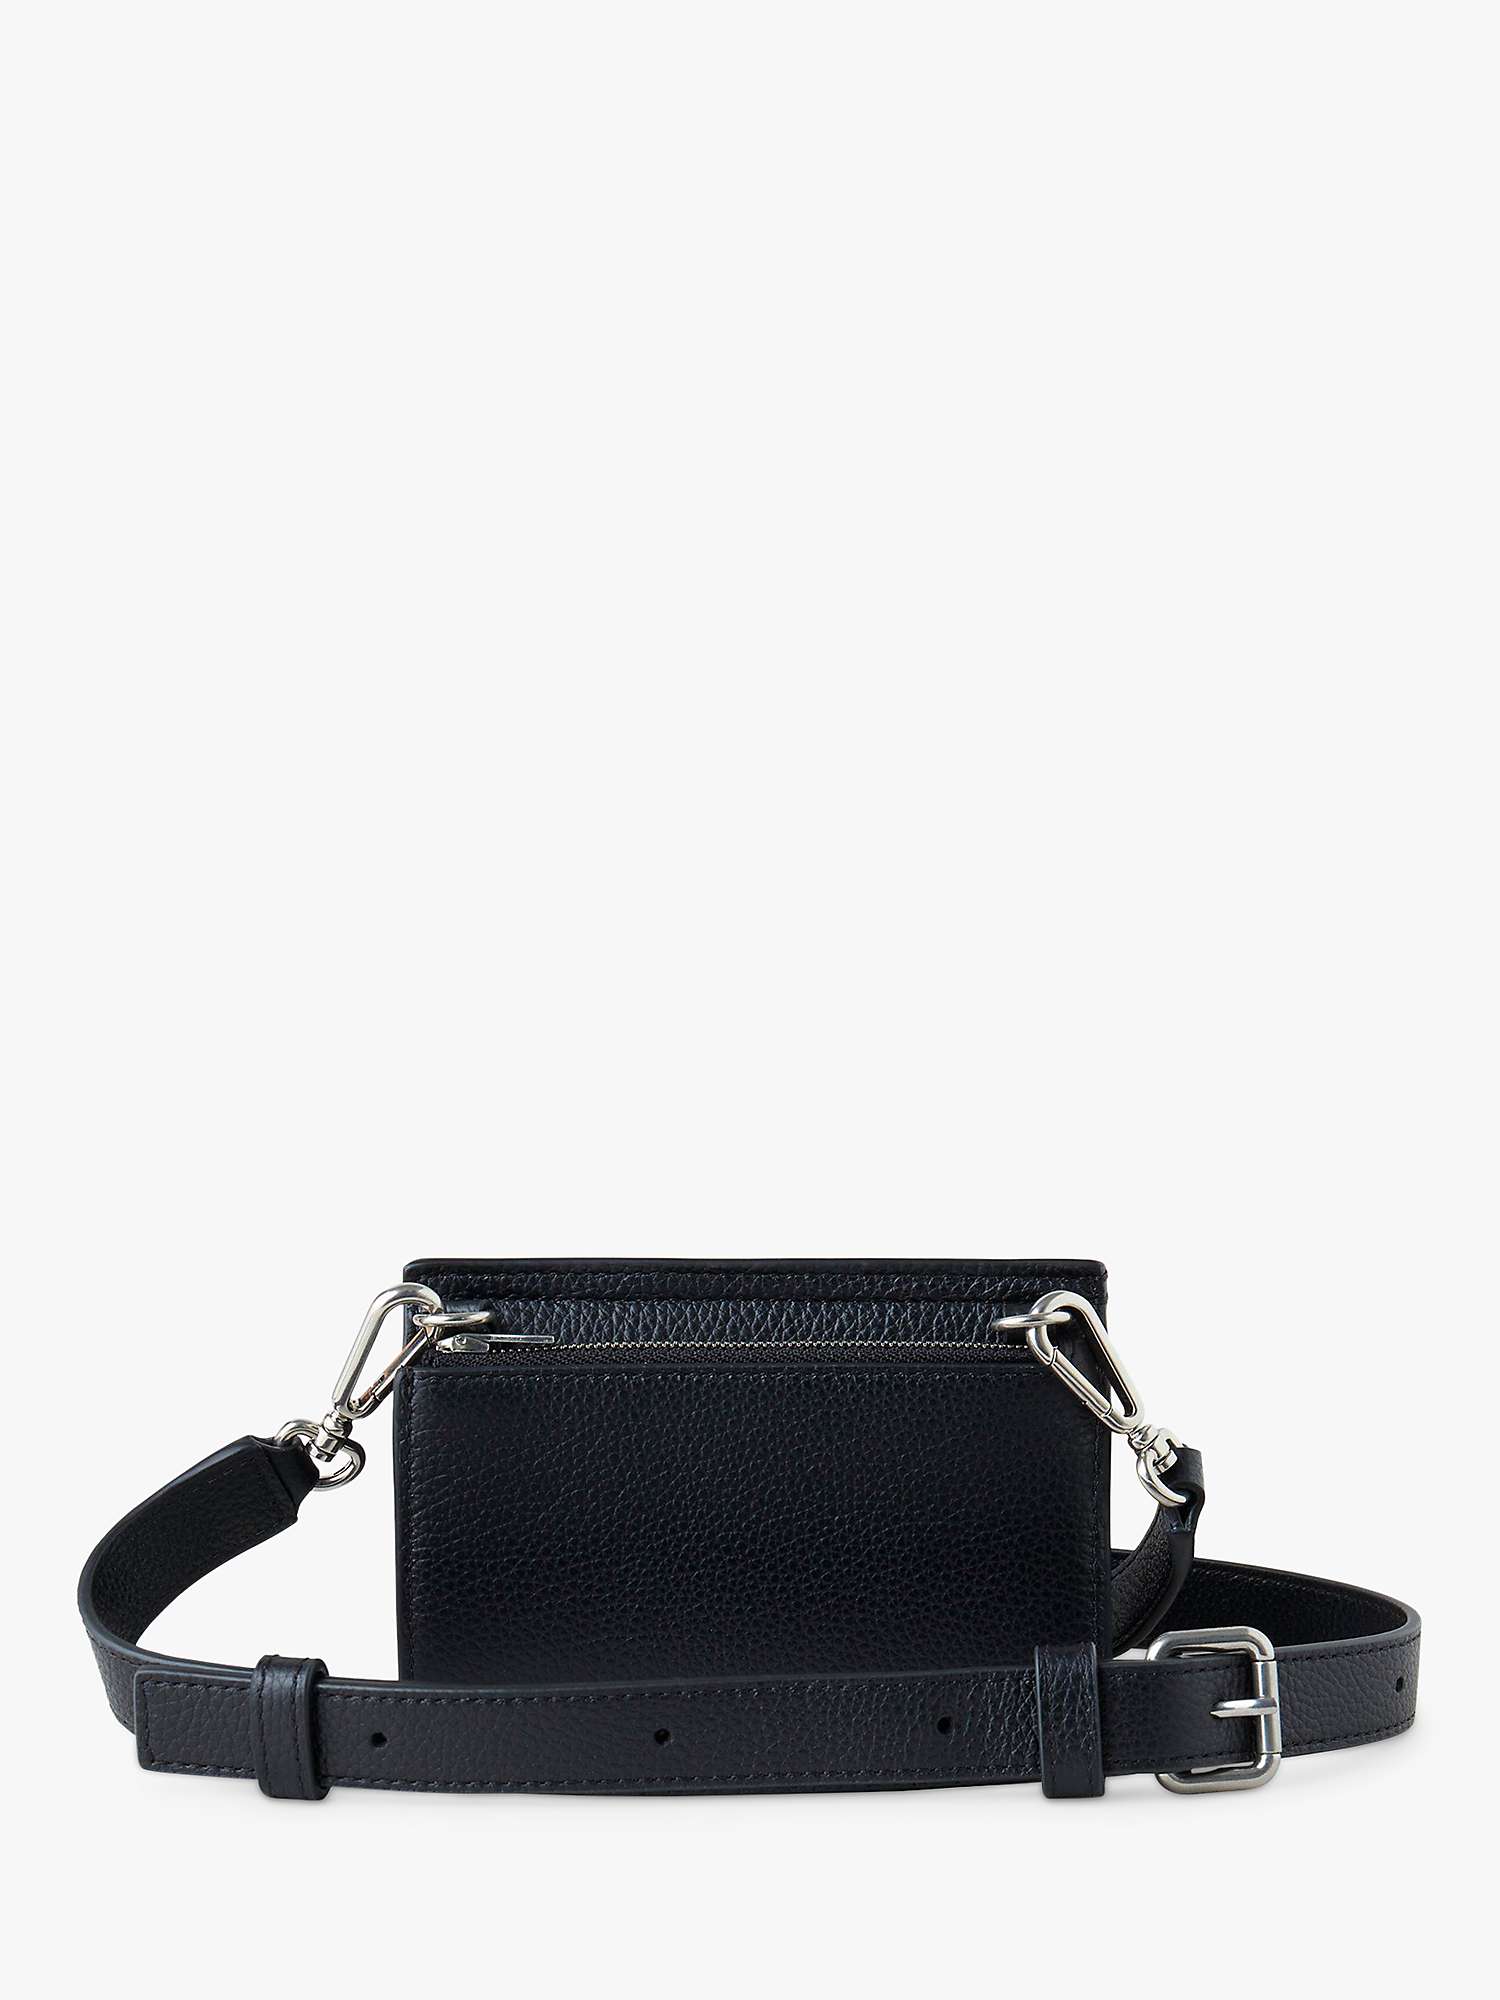 Buy Mulberry East West Antony Small Classic Grain Leather Pouch, Black Online at johnlewis.com